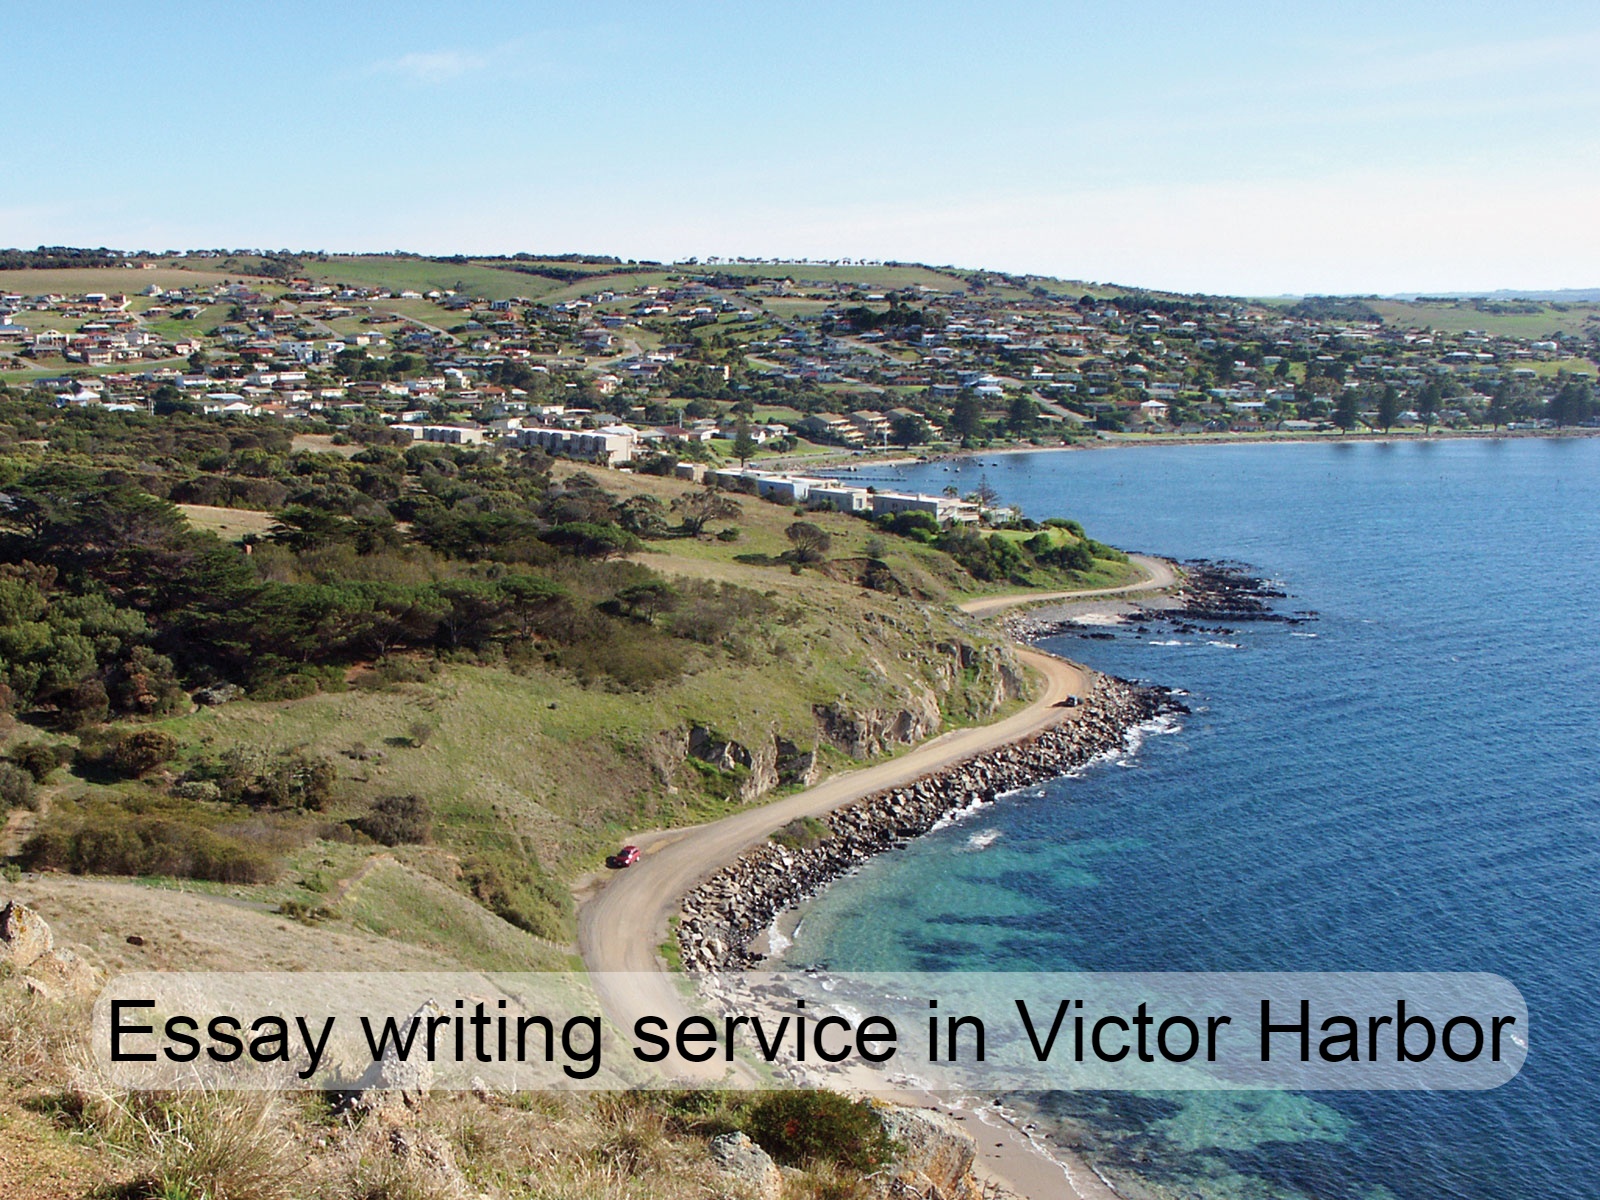 Essay writing service in Victor Harbor